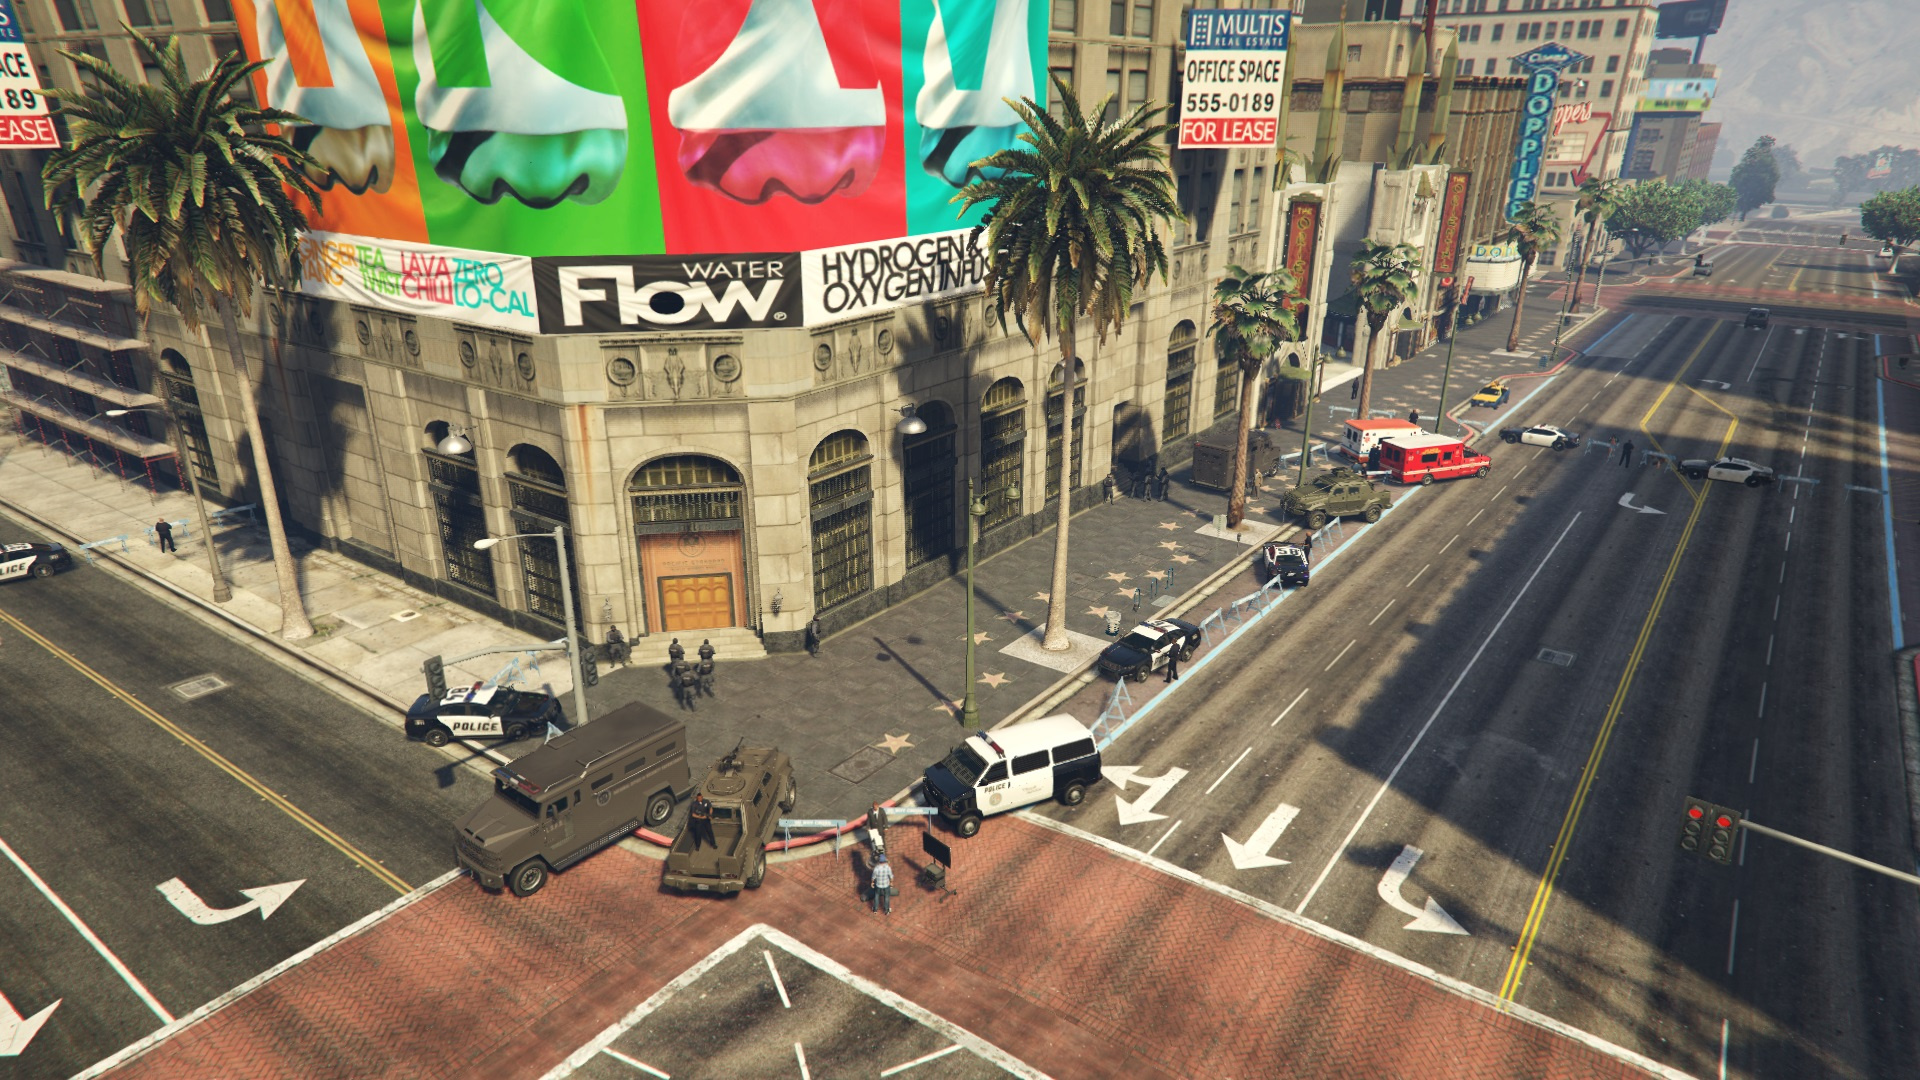 All banks in gta 5 фото 19